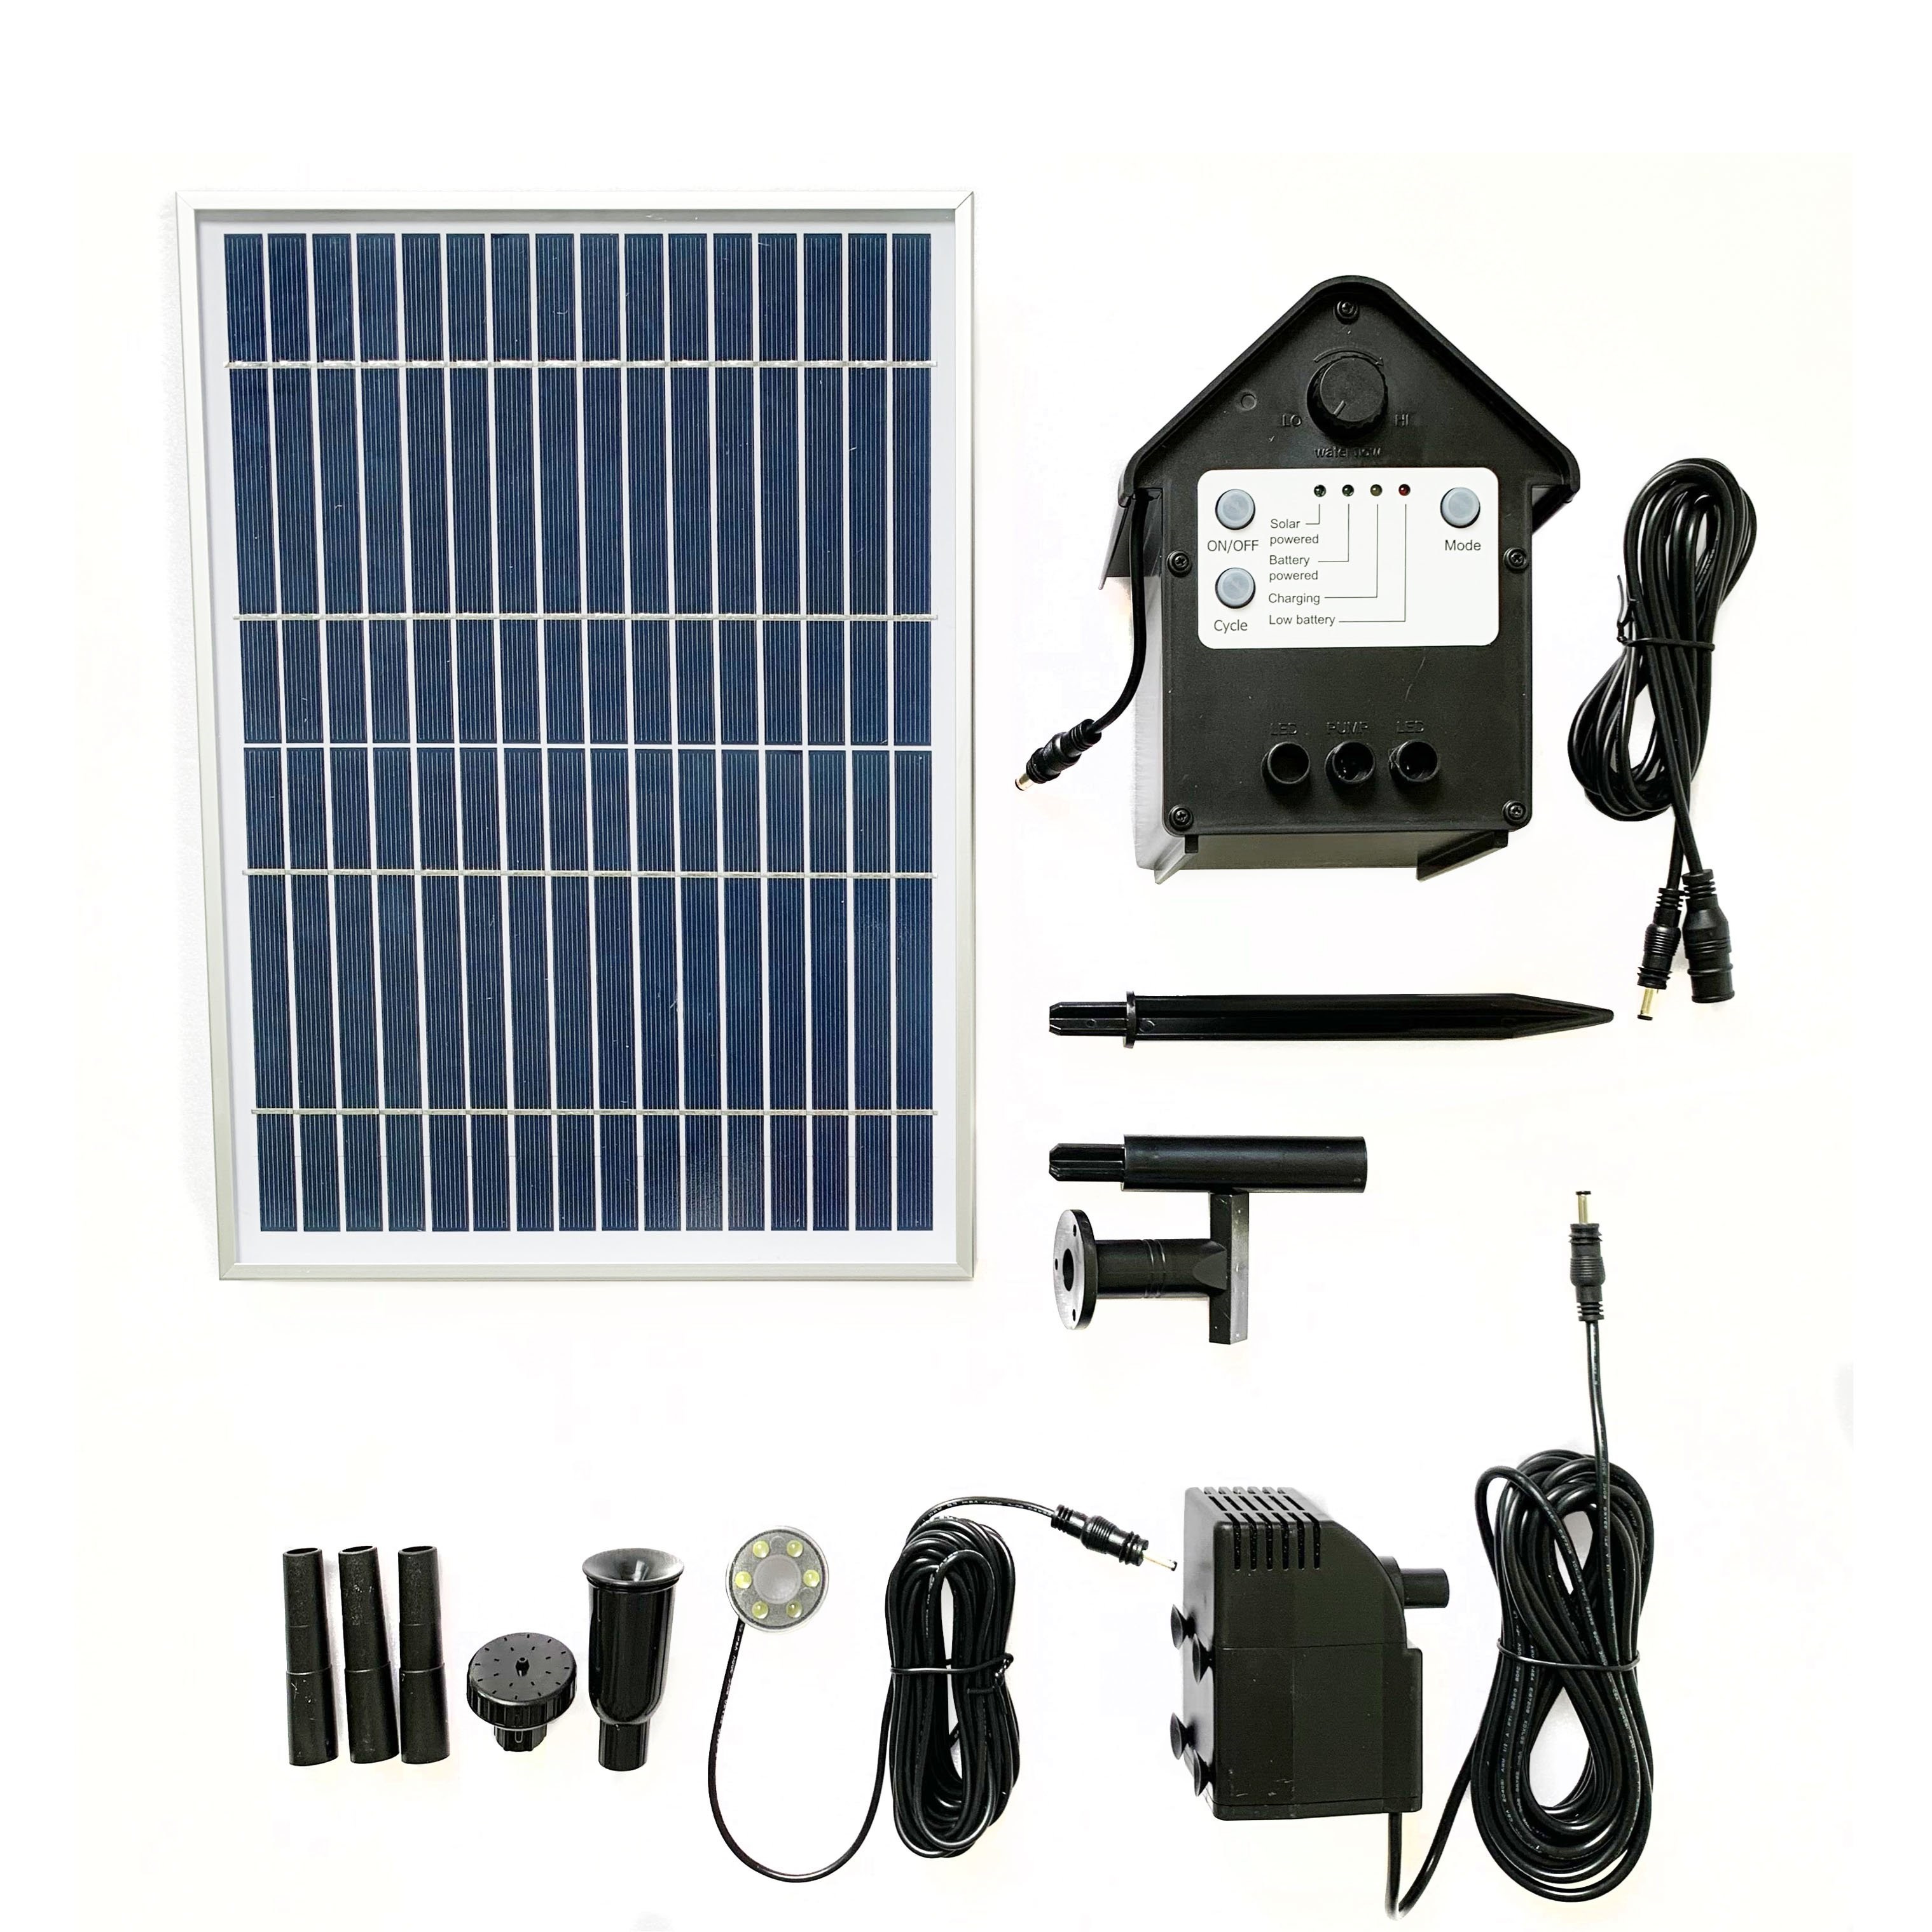 800LPH Solar Water Pump Kit with Lights by Solaray